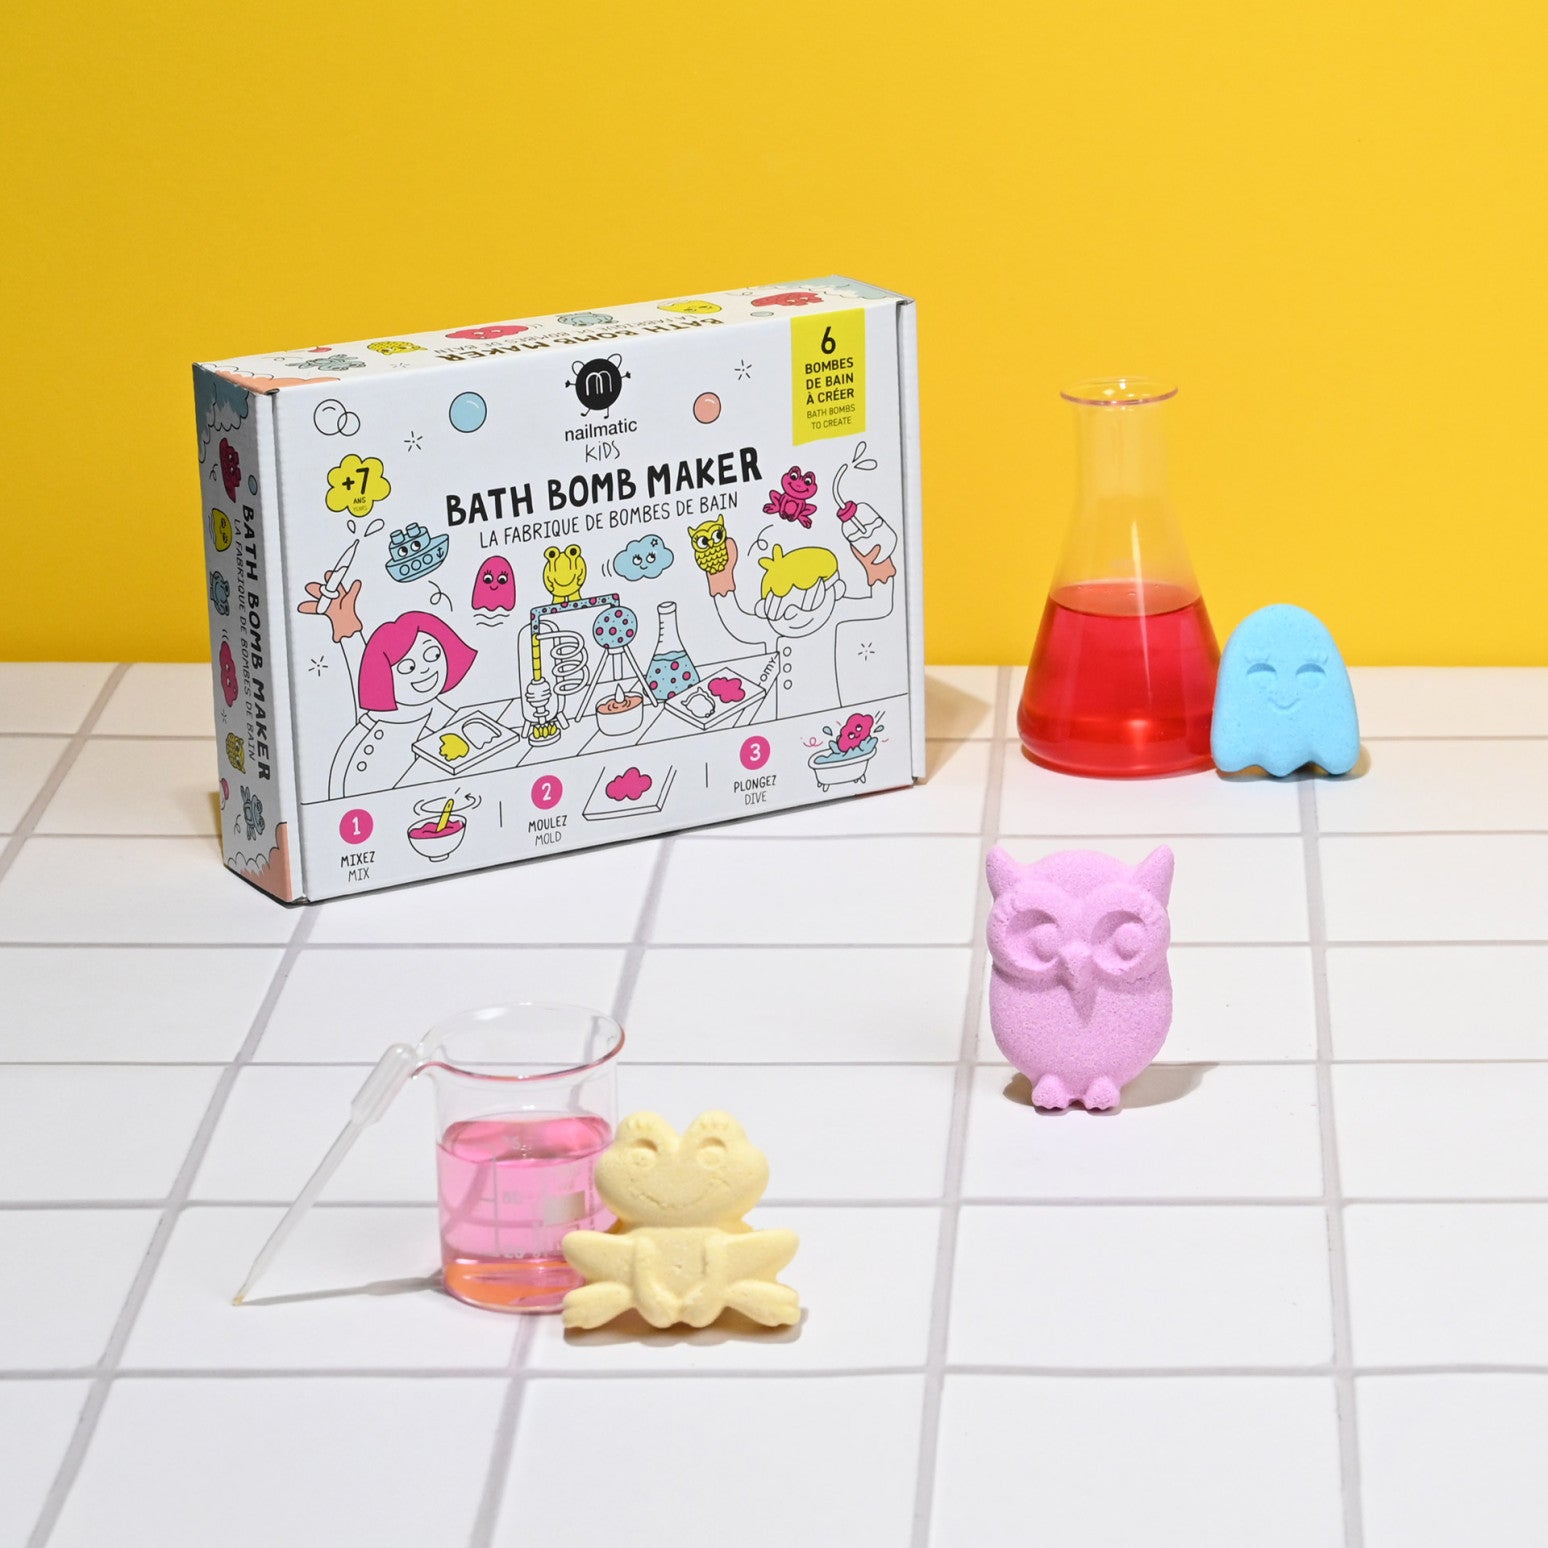 The Every Space Bath Bomb Maker kit by Nailmatic